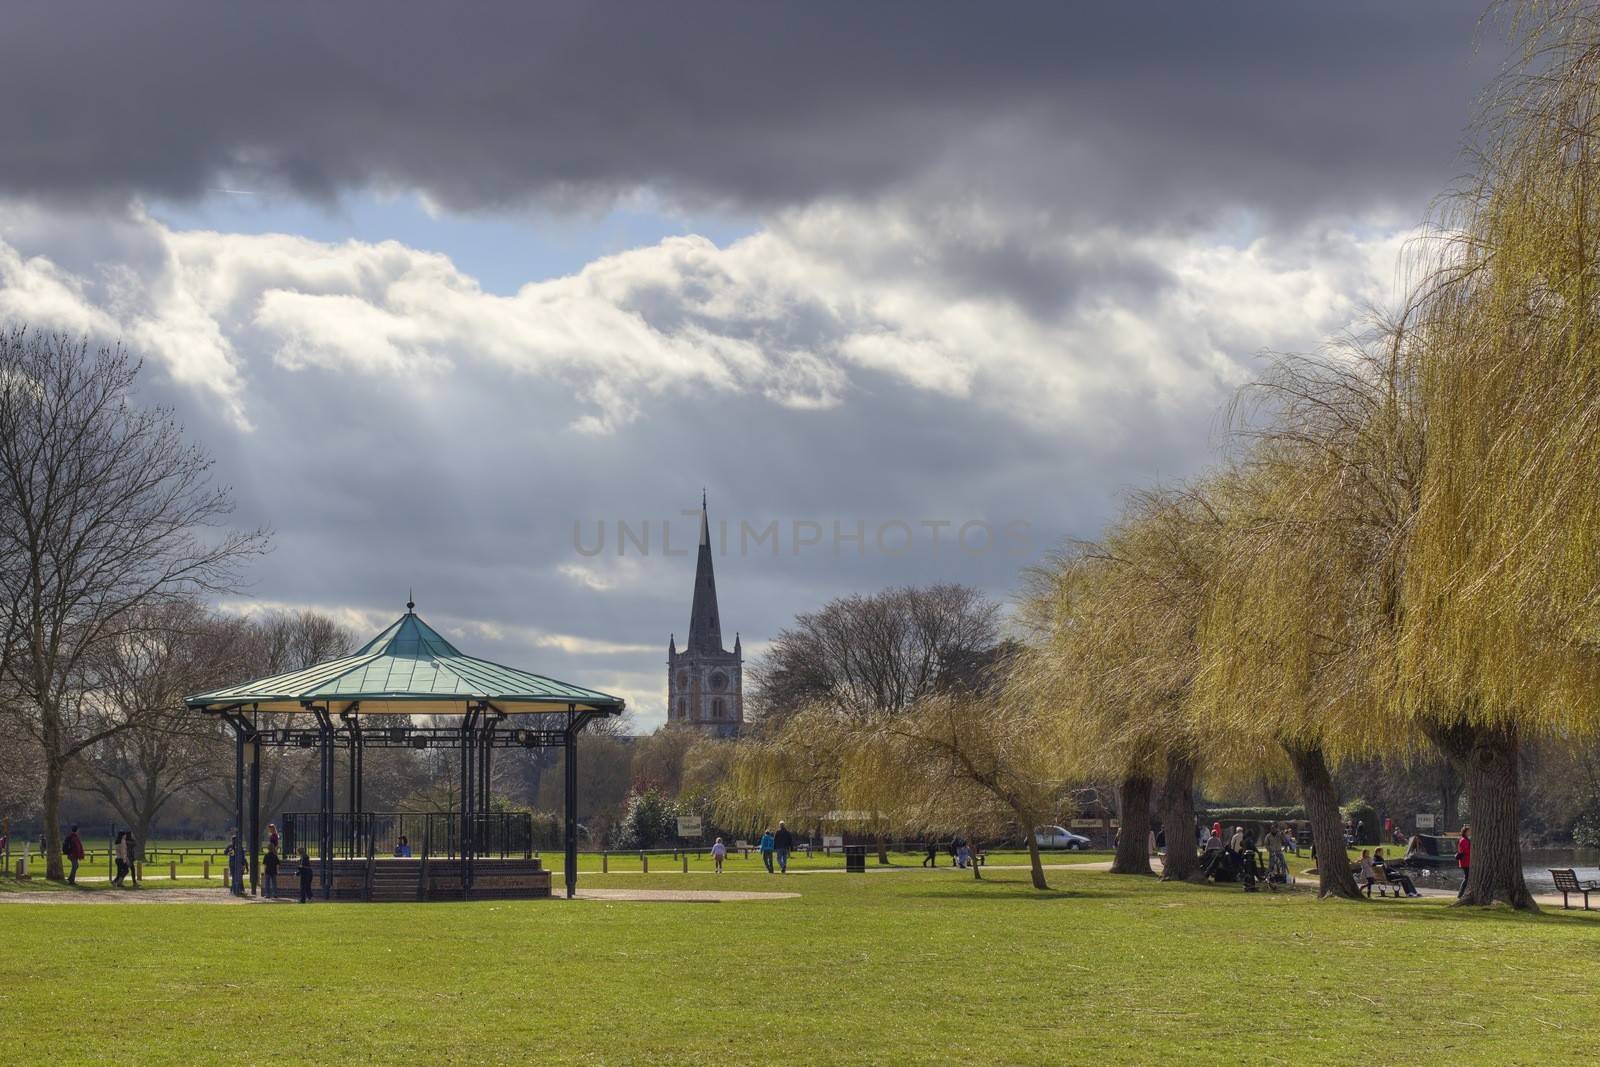 Park at Stratford upon Avon by andrewroland